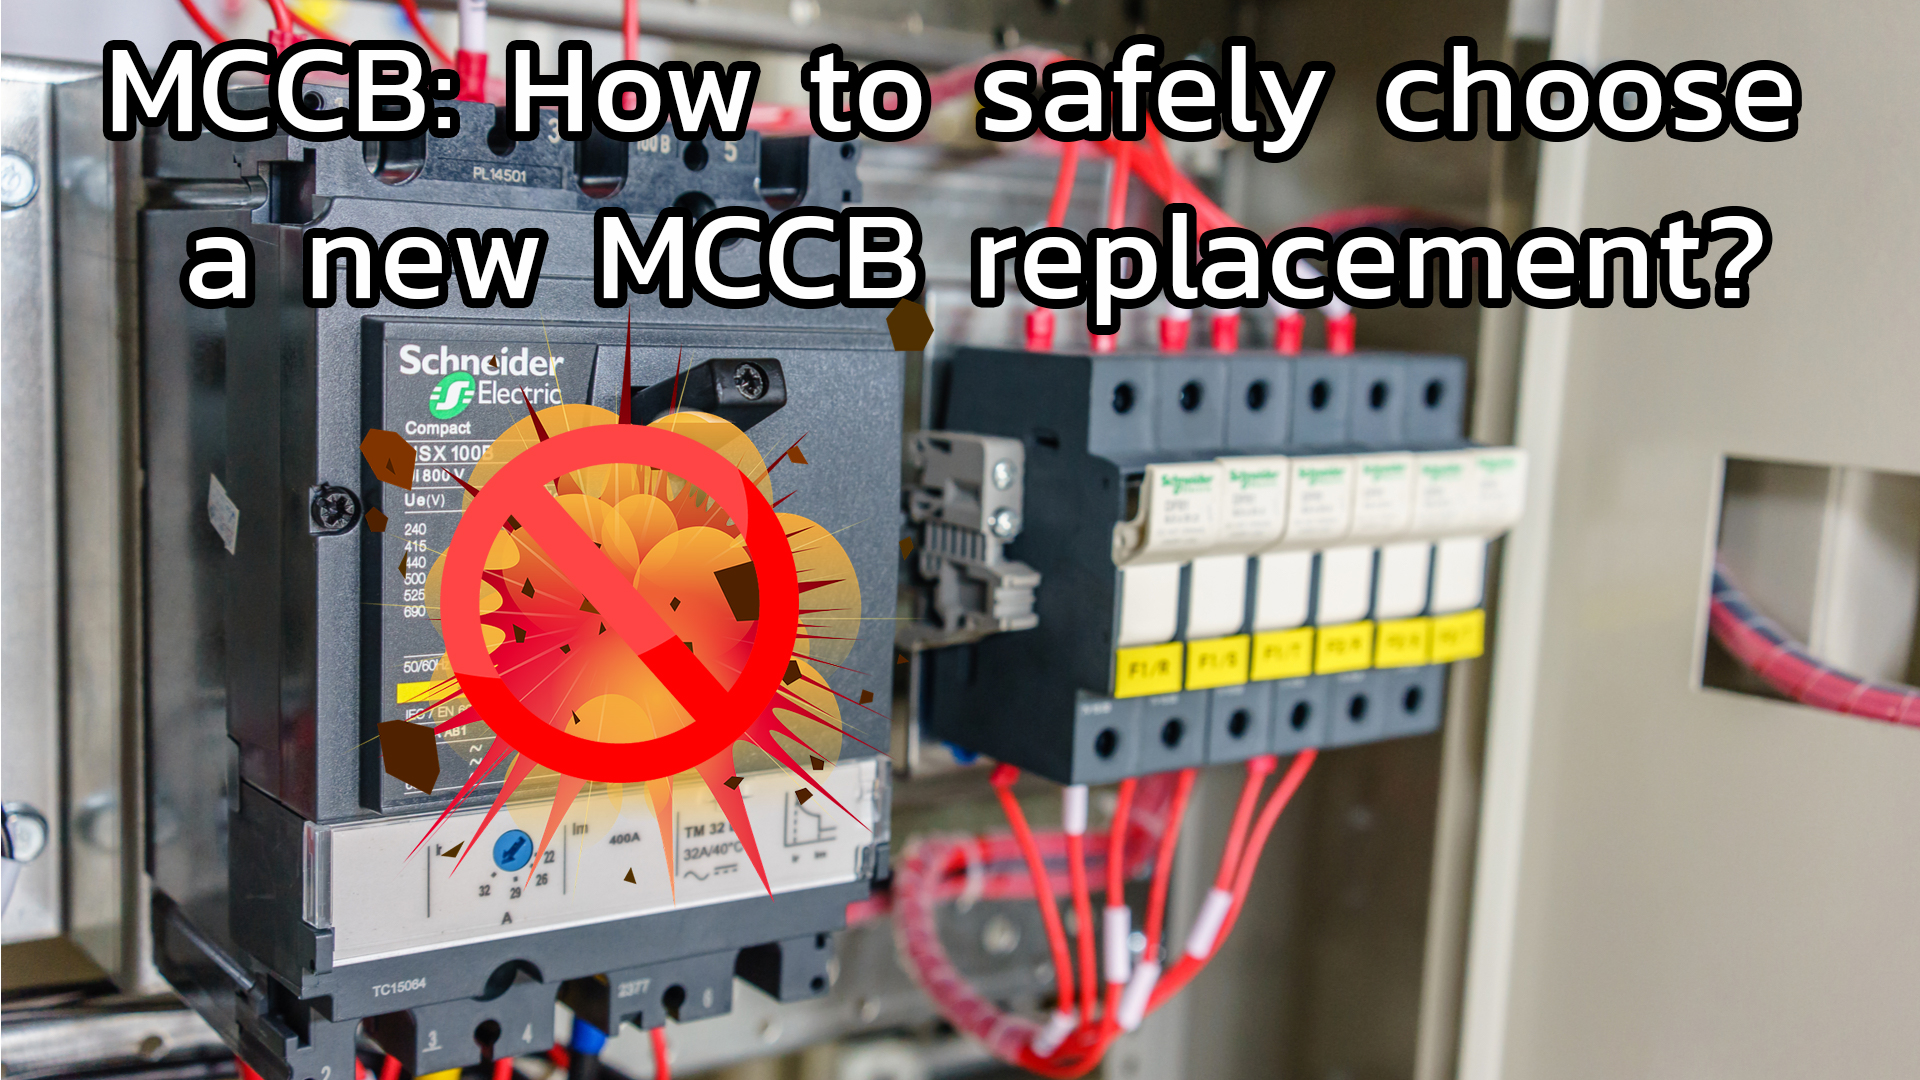 How to safely replace MCCB